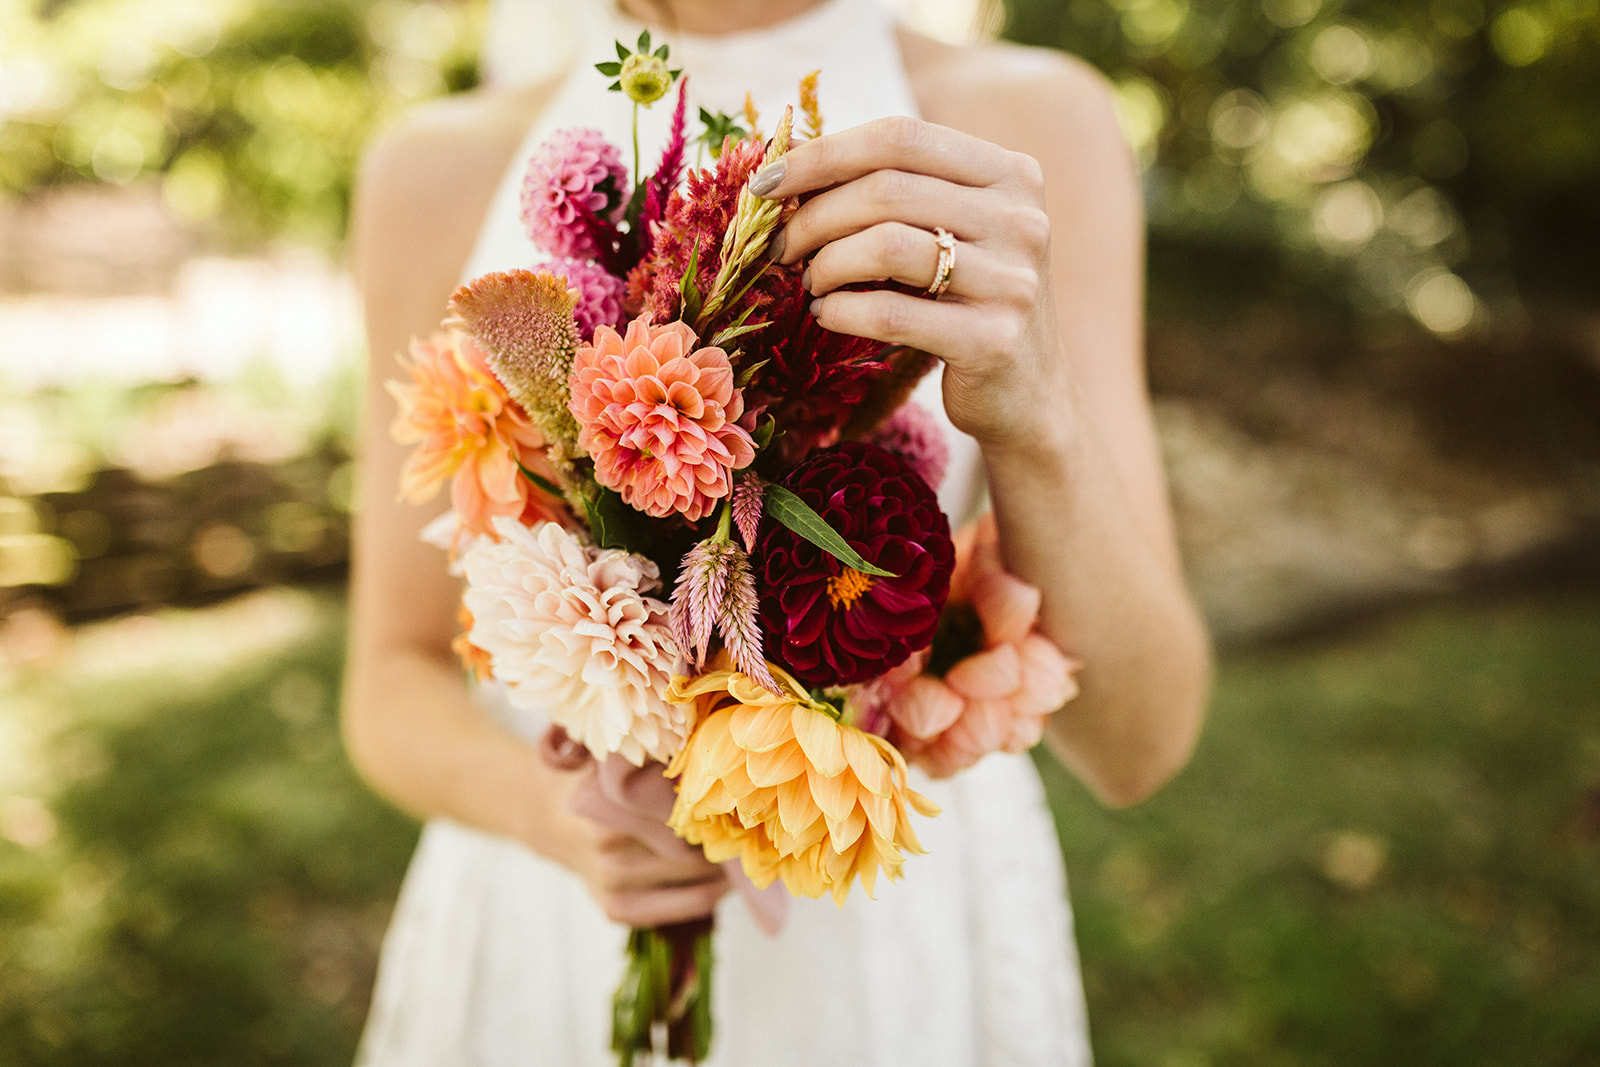 A bride examines her pink and red bouquet.